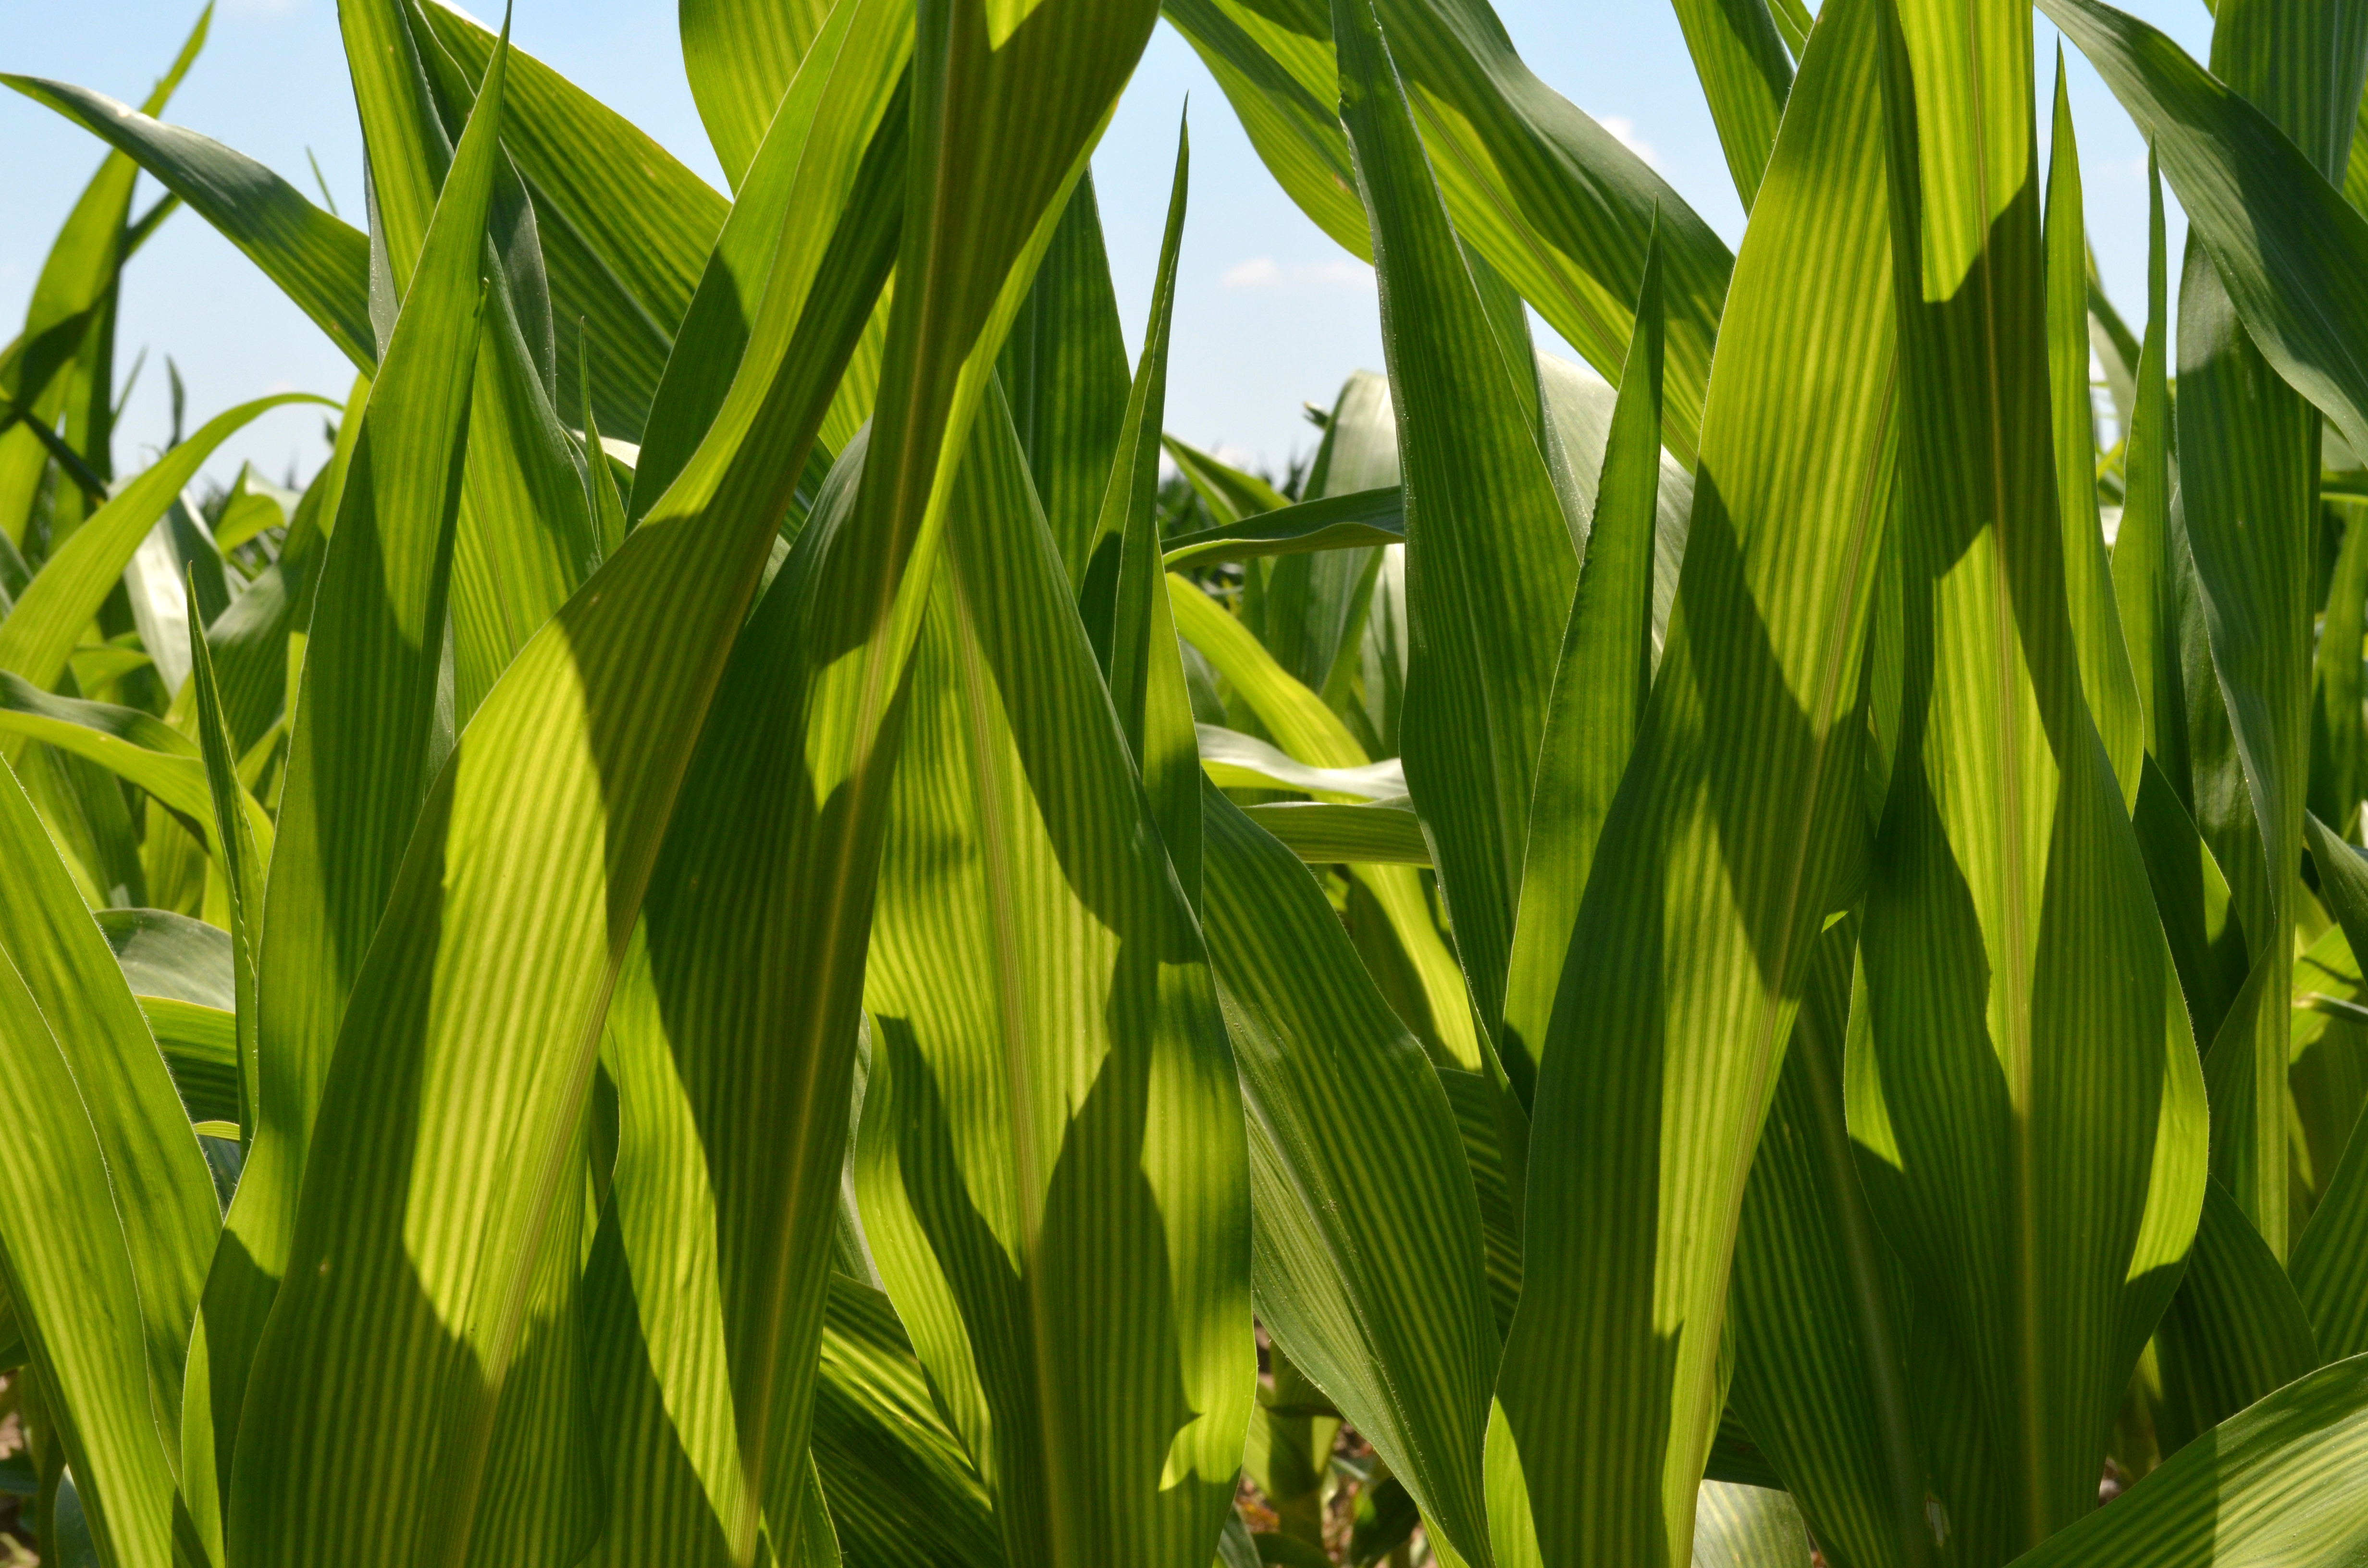 Close-up of corn plant leaves that have an alternating yellow and green striped pattern.